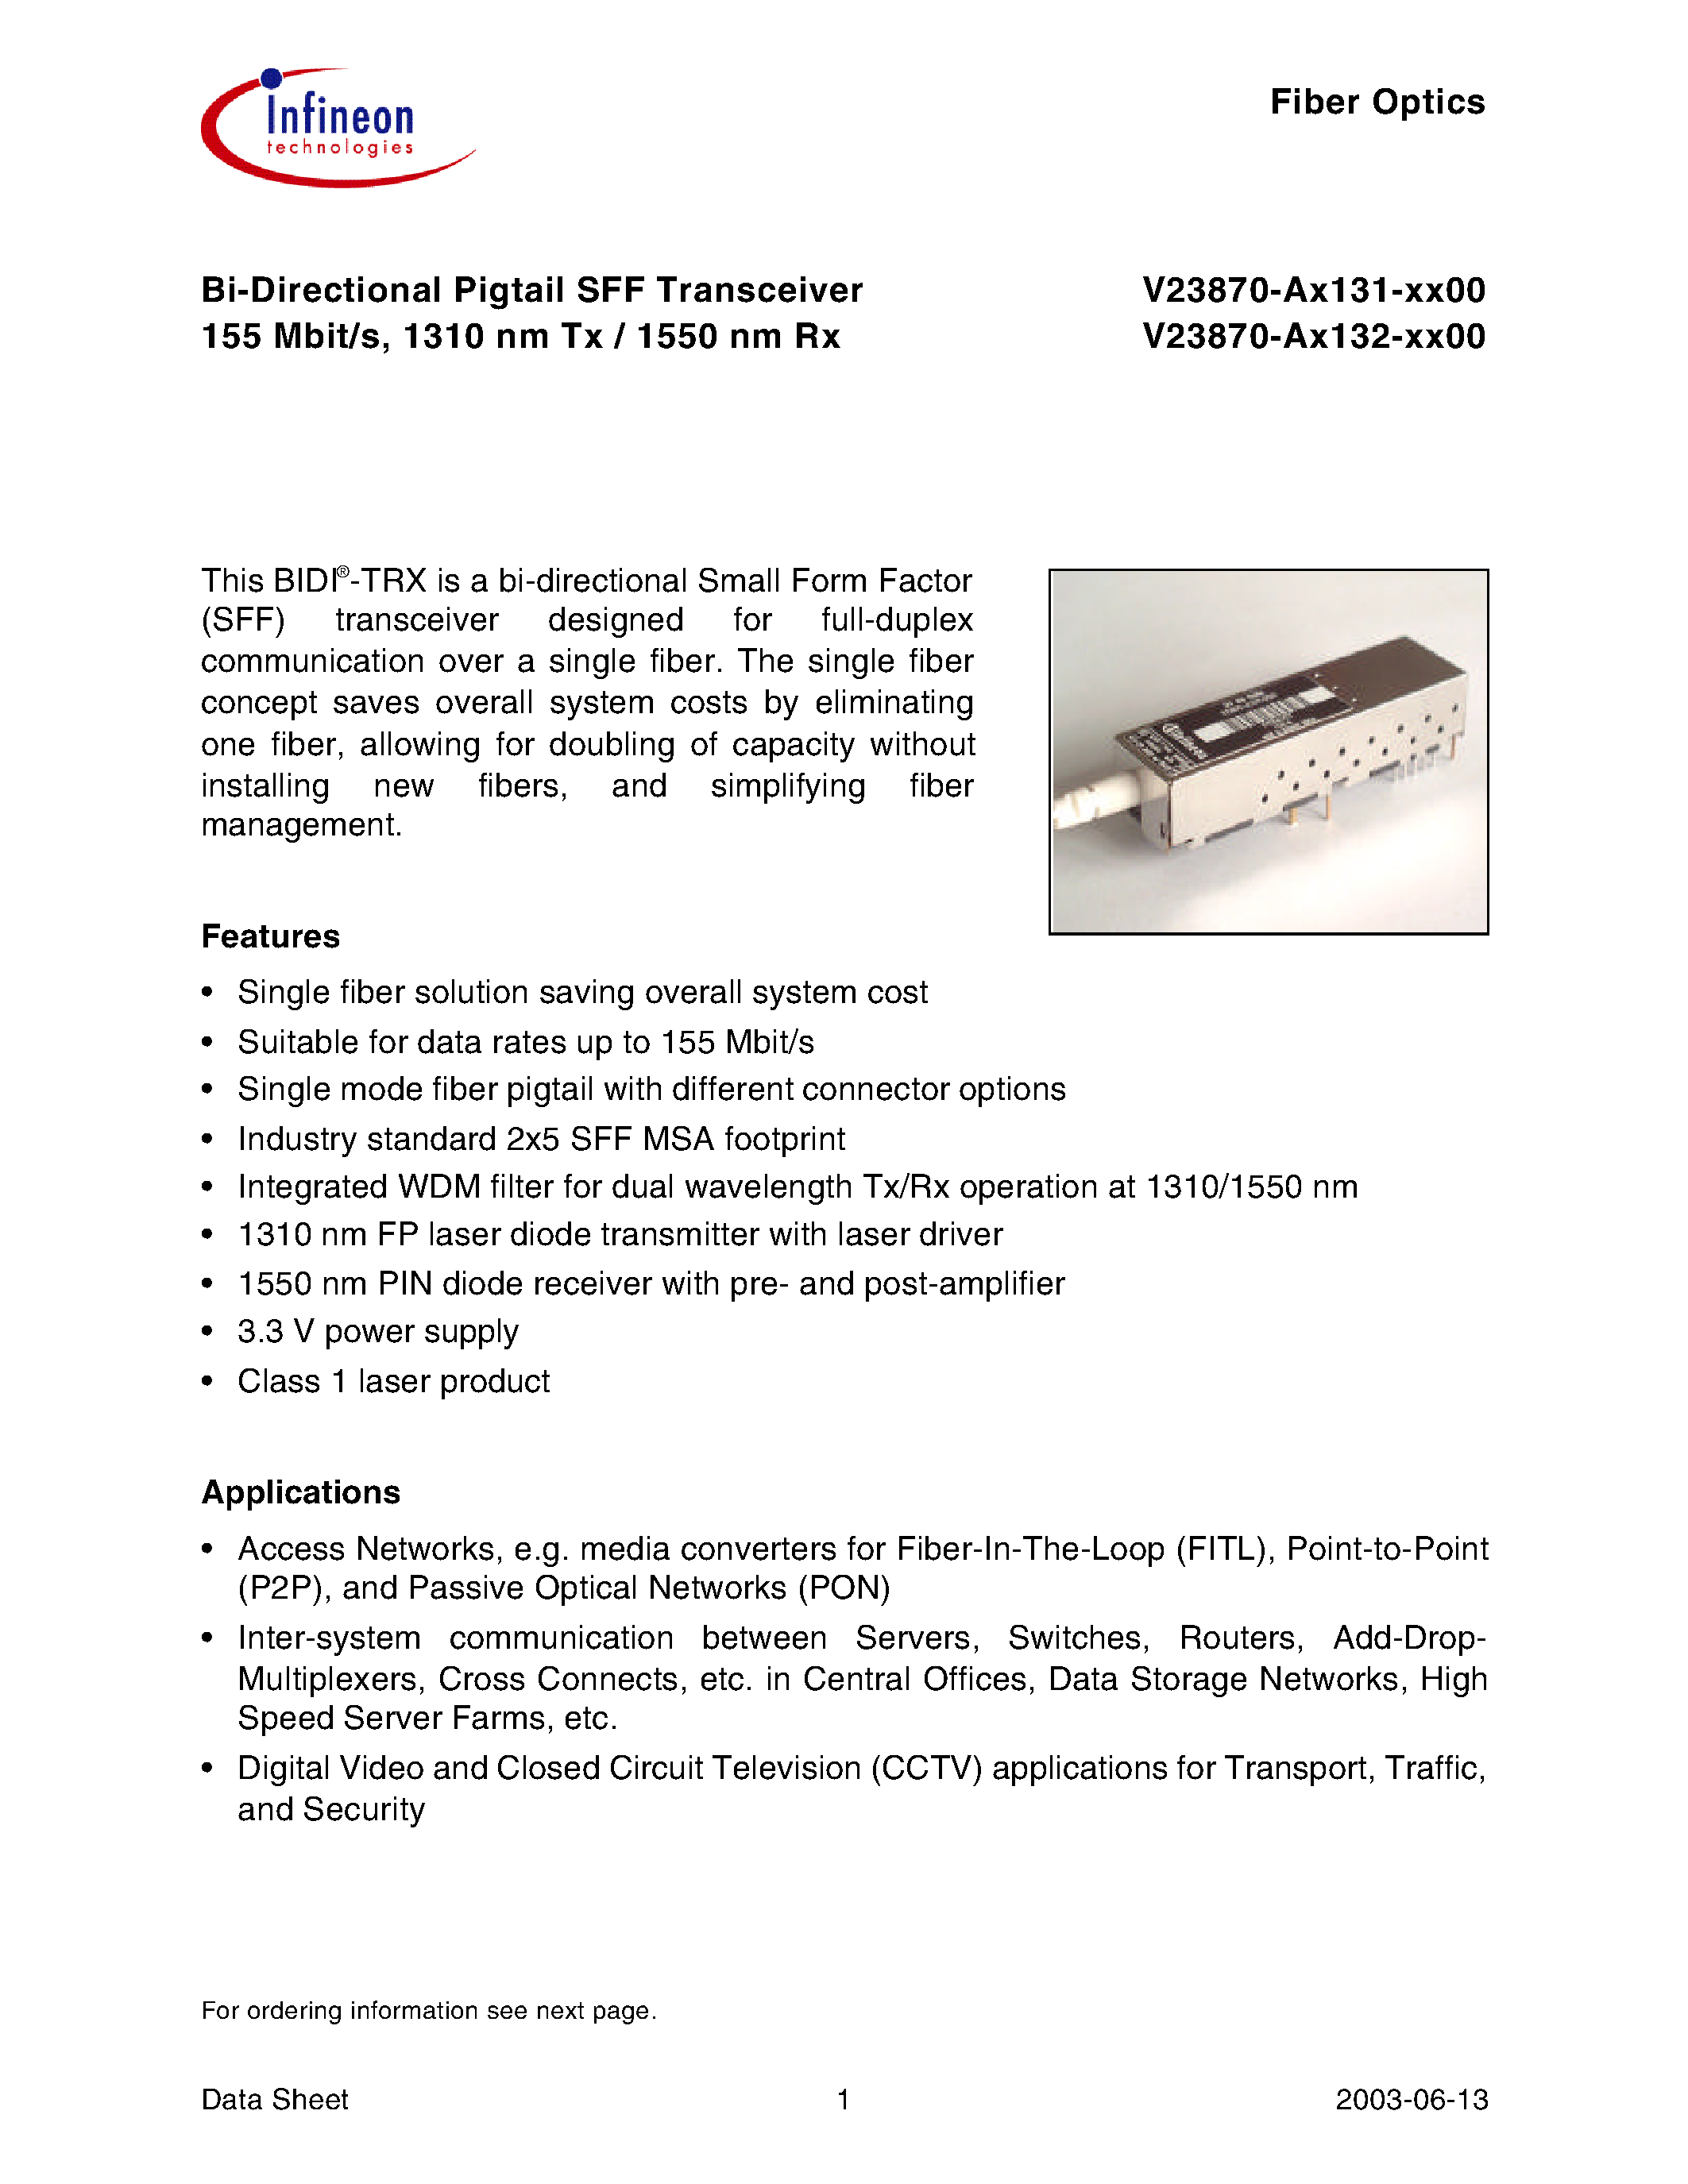 Datasheet V23870-A3132-F100 - Bi-Directional Pigtail SFF Transceiver 155 Mbit/s/ 1310 nm Tx / 1550 nm Rx page 1